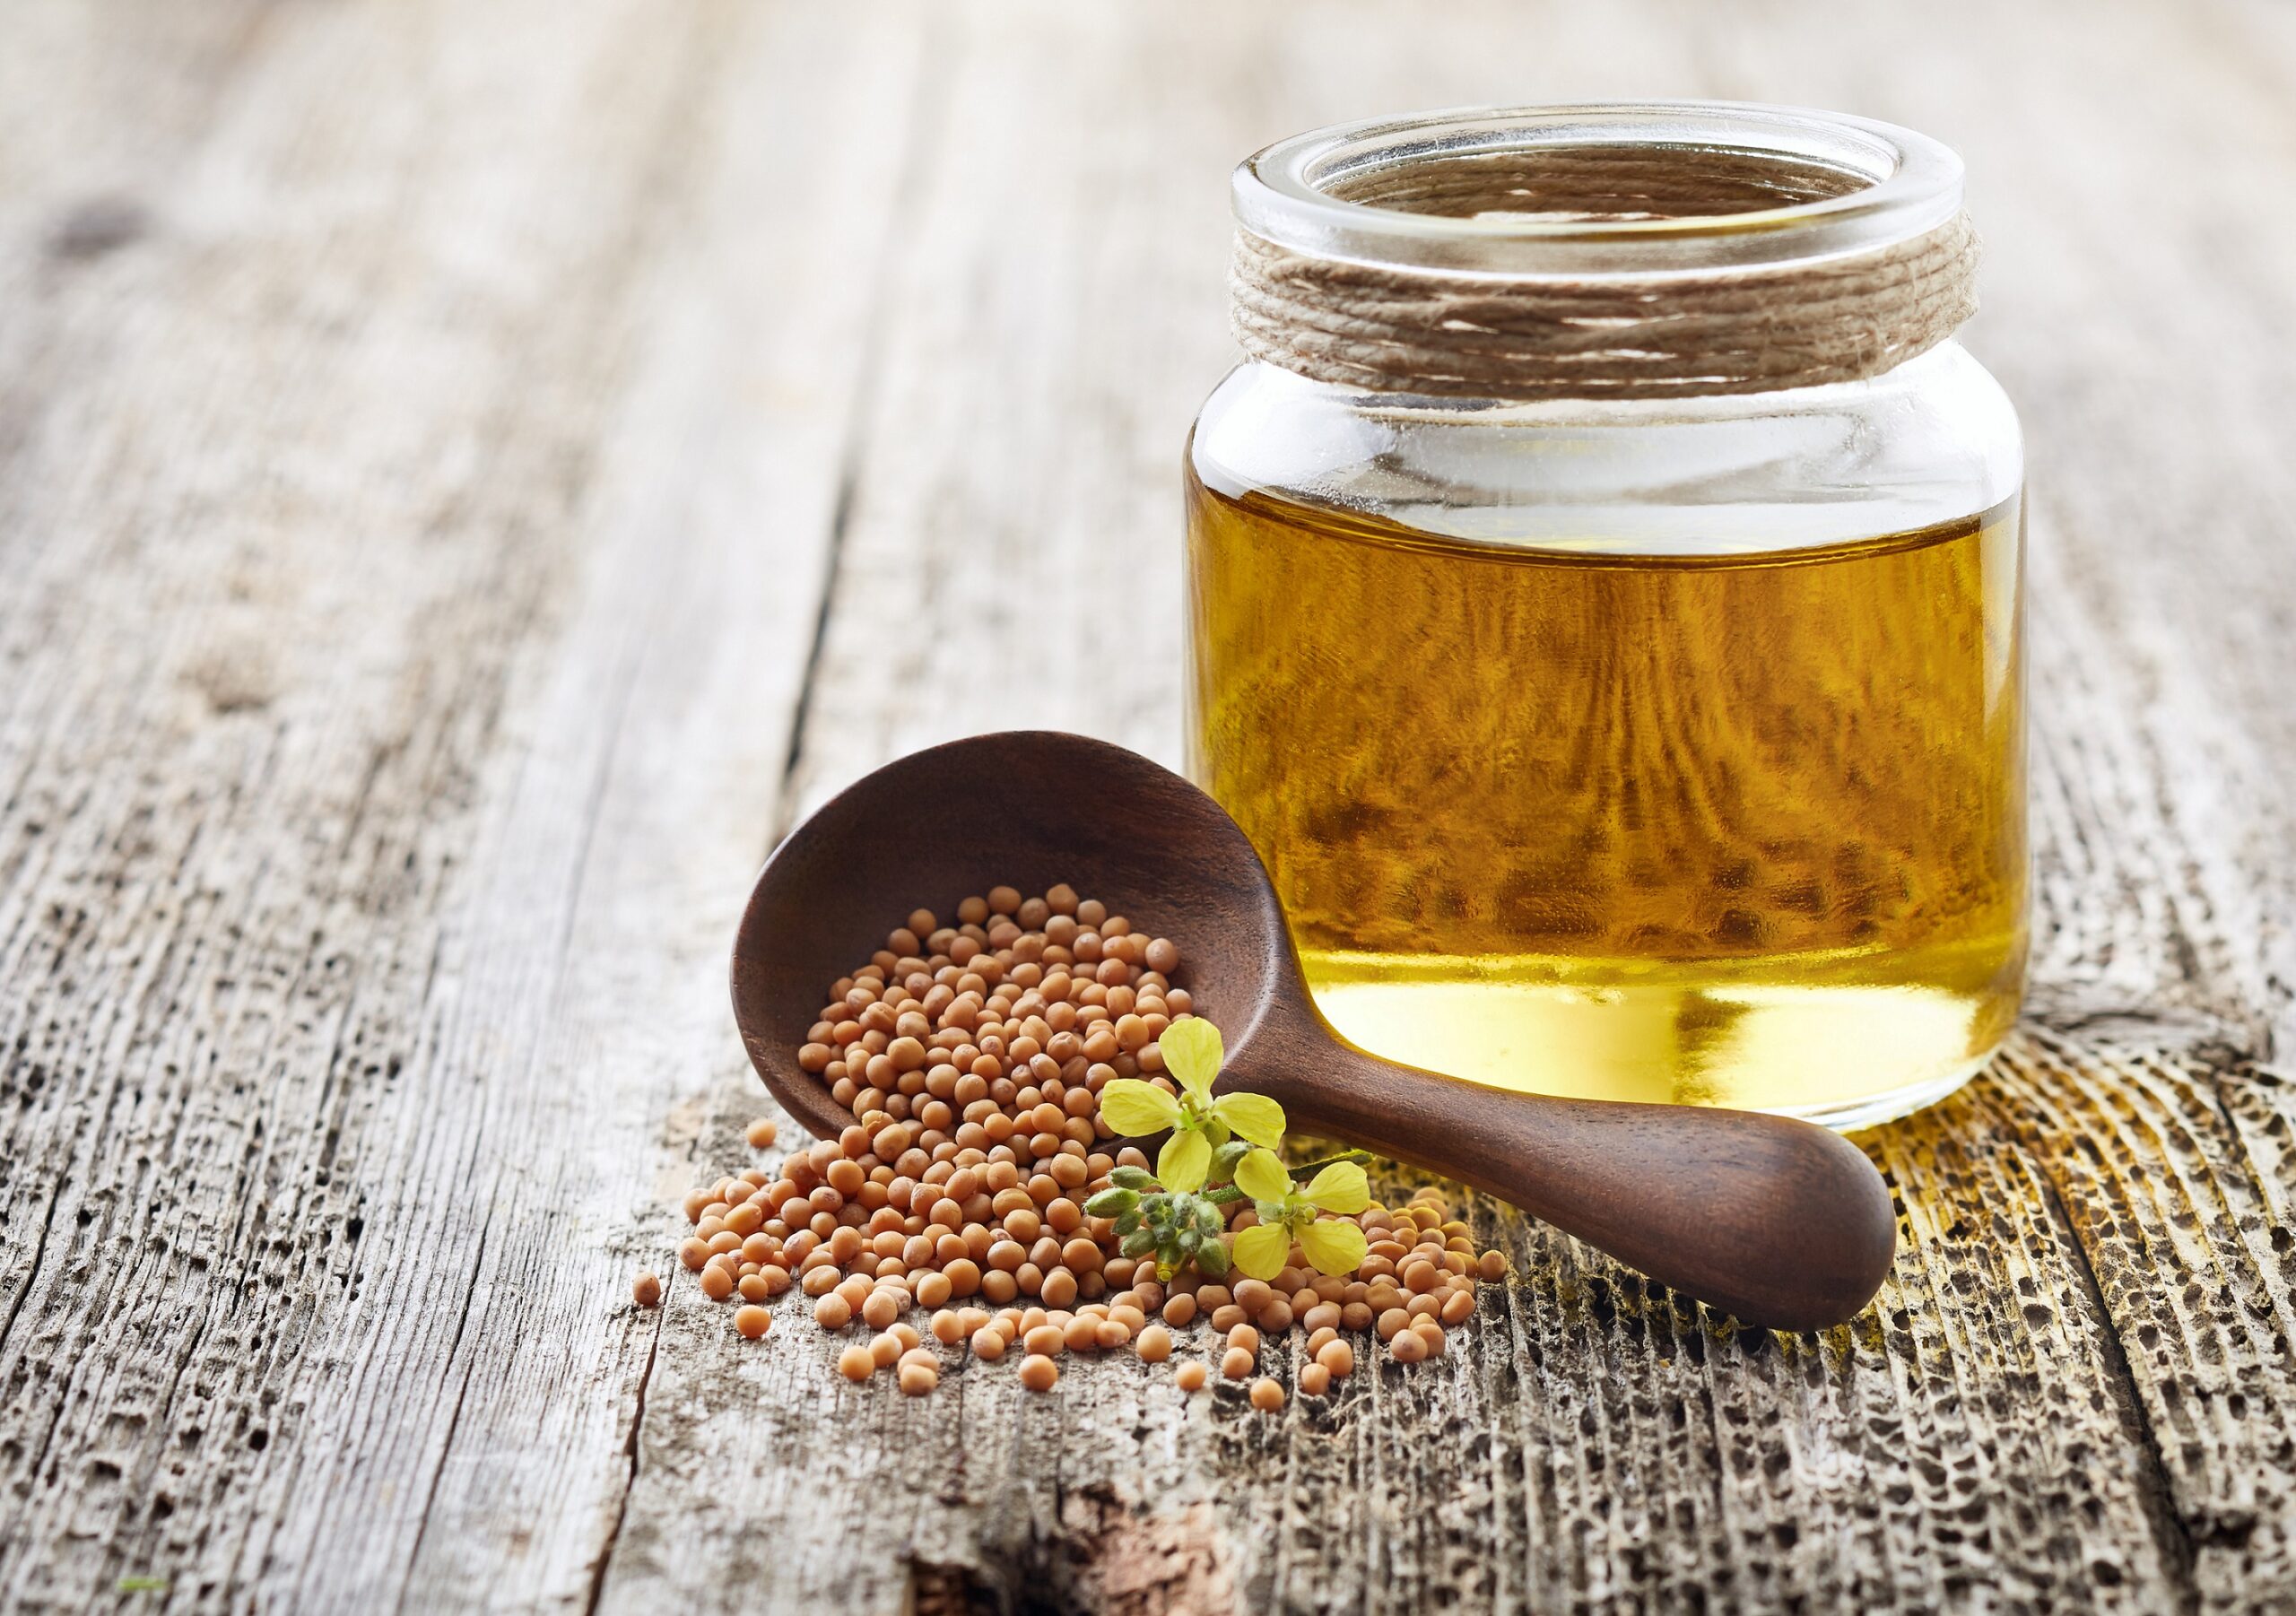 Mustard oil reduces inflammation, strengthens the heart and prevents diabetes